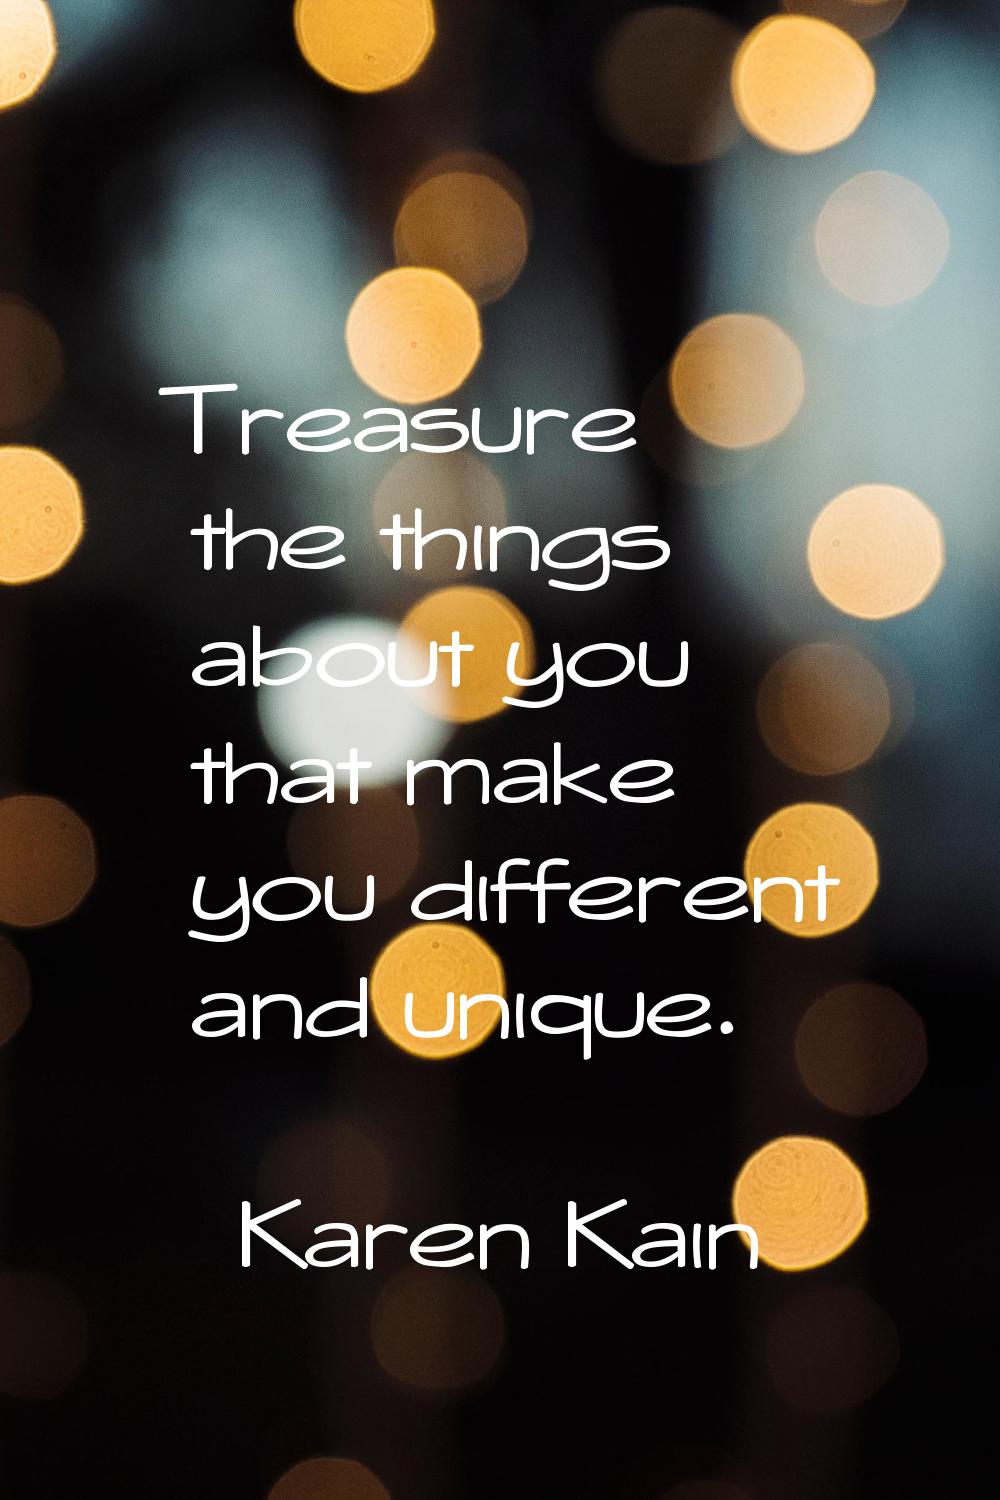 Treasure the things about you that make you different and unique.